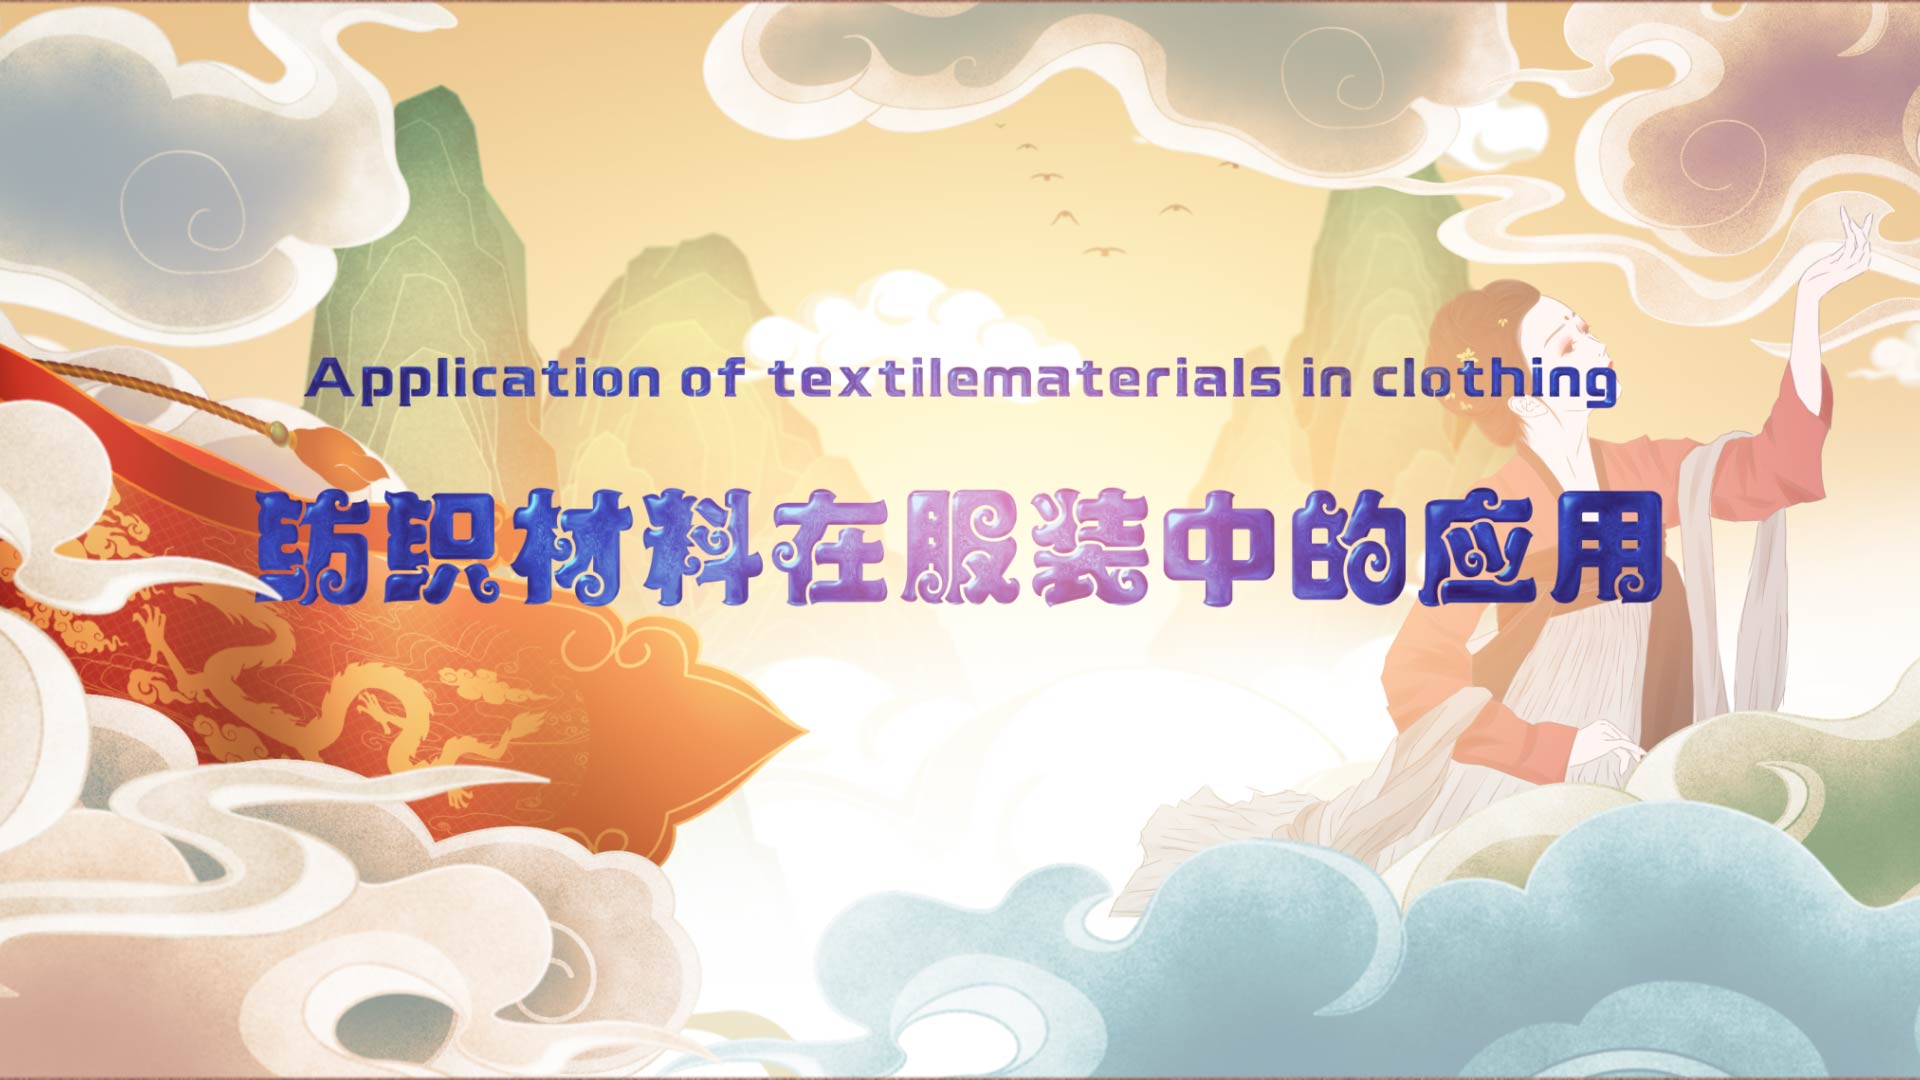 APPLICATION OF TEXTILE MATERIALS IN CLOTHING